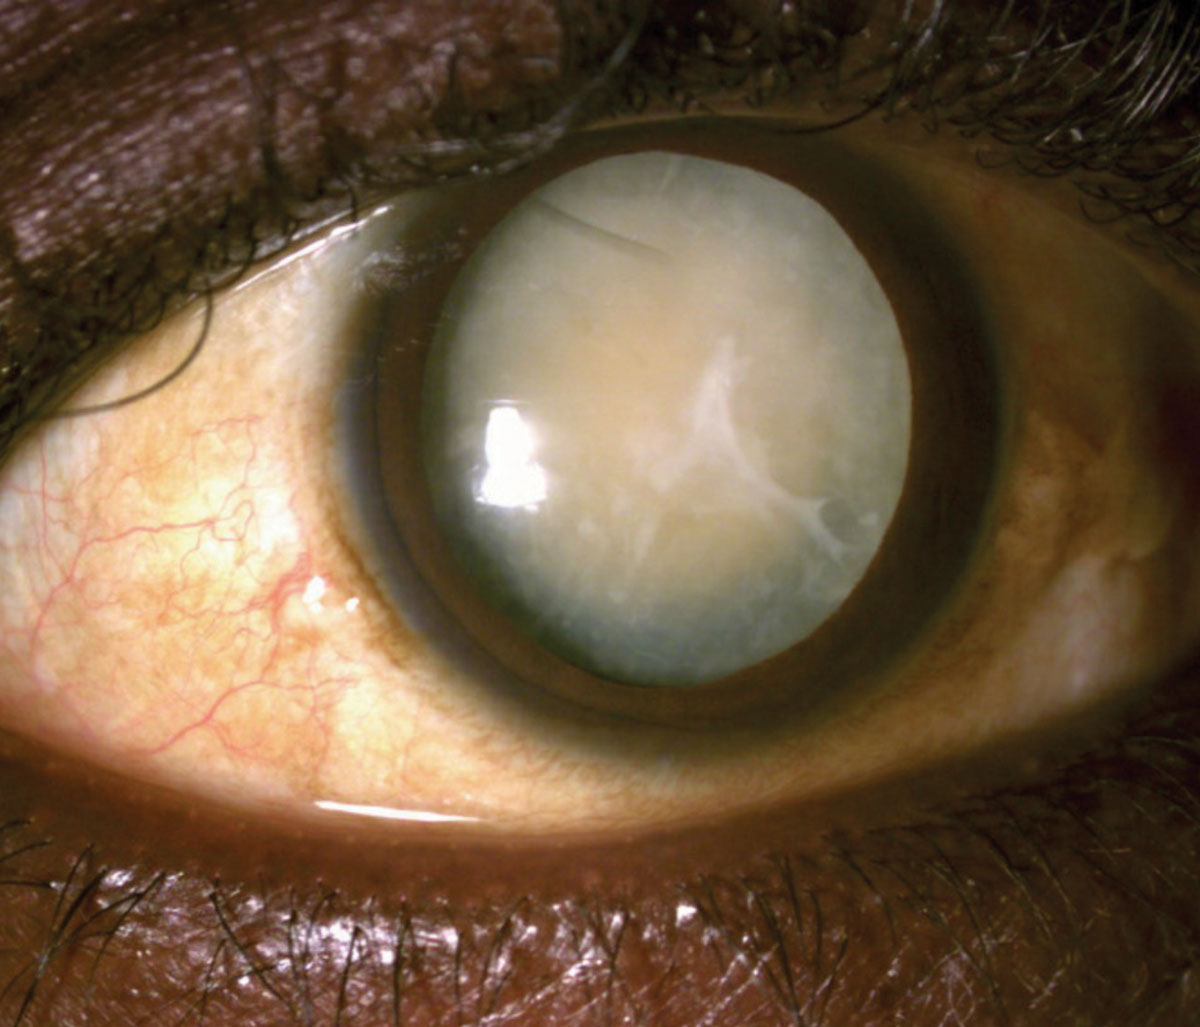 Nearly a third of eyes had intraocular pathologies after mature cataract surgery in this study. 